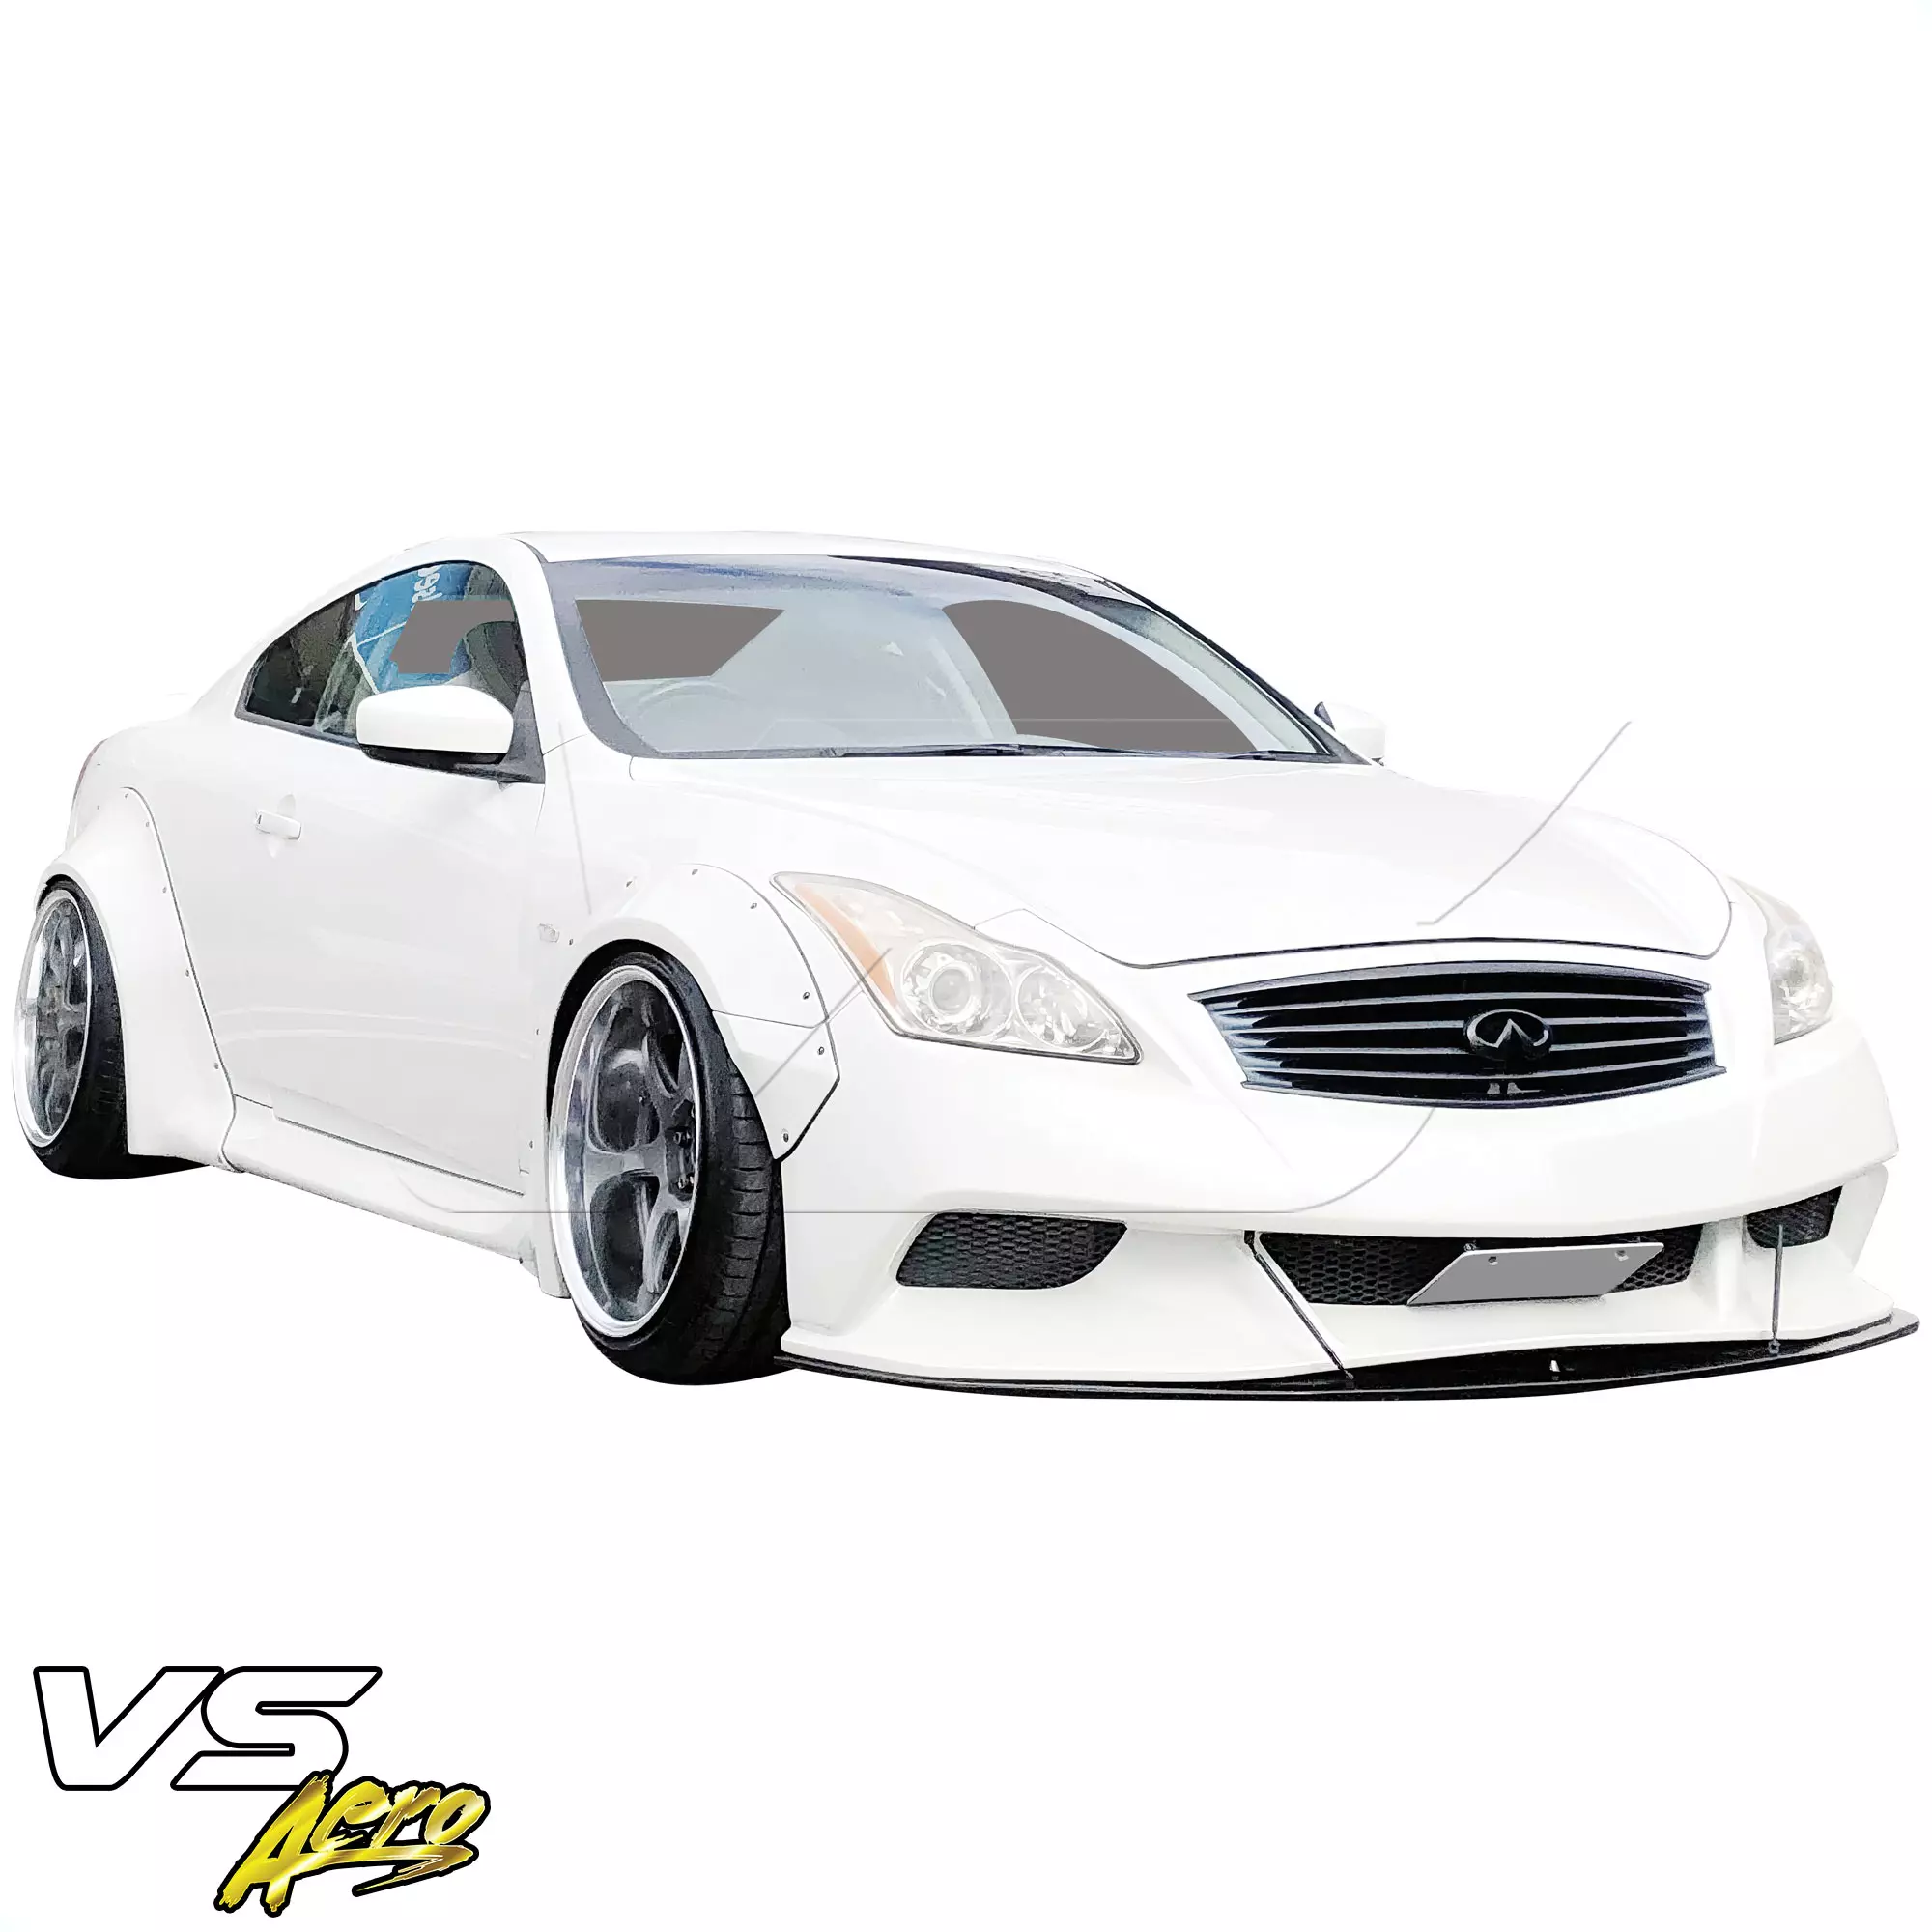 VSaero FRP LBPE Wide Body Fender Flares (front) 4pc > Infiniti G37 Coupe 2008-2015 > 2dr Coupe - Image 31